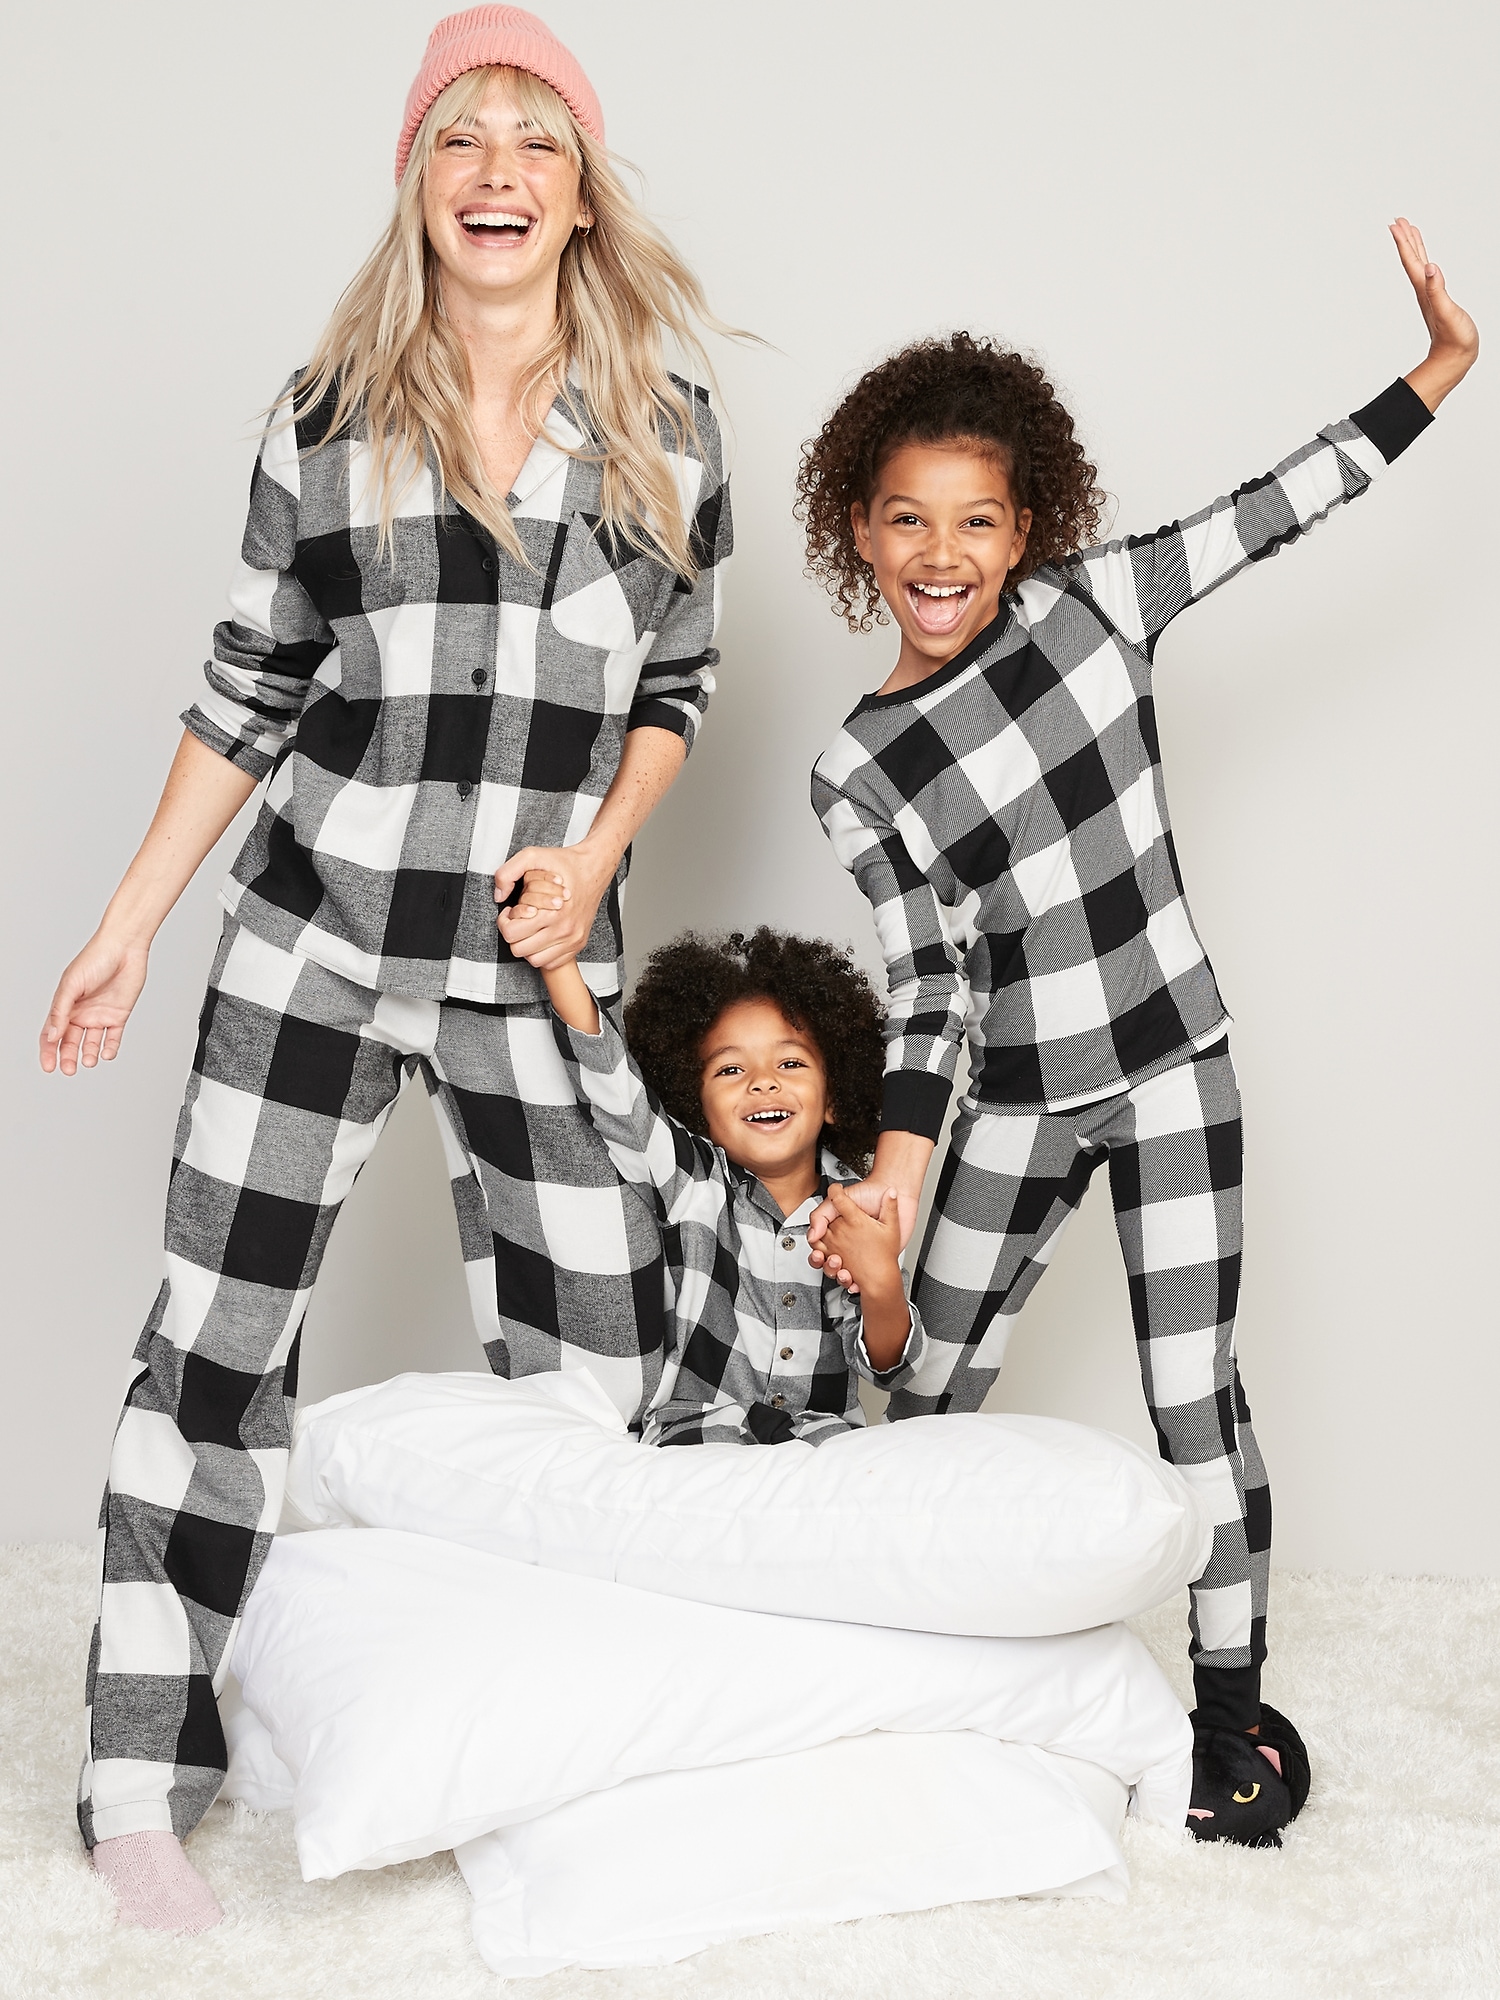 Matching Flannel Pajama Set, Old Navy